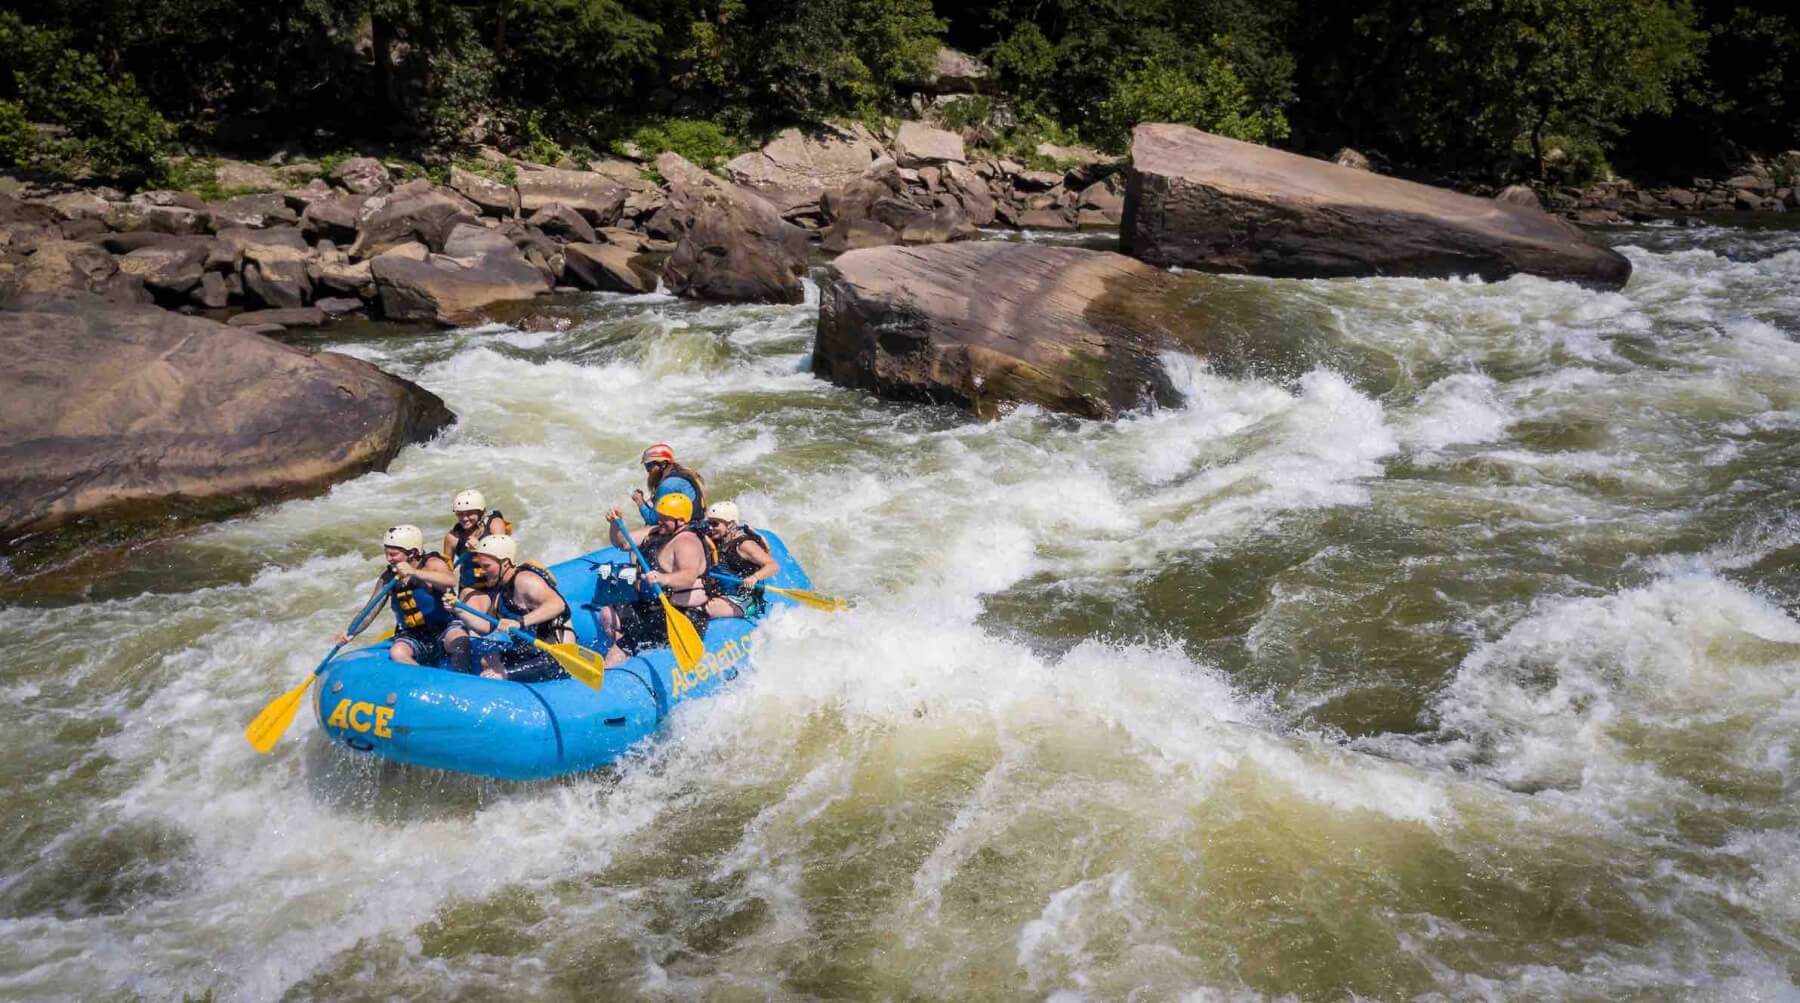 whitewater rafting in the new river gorge with ace adventure resort lower keeny rapid